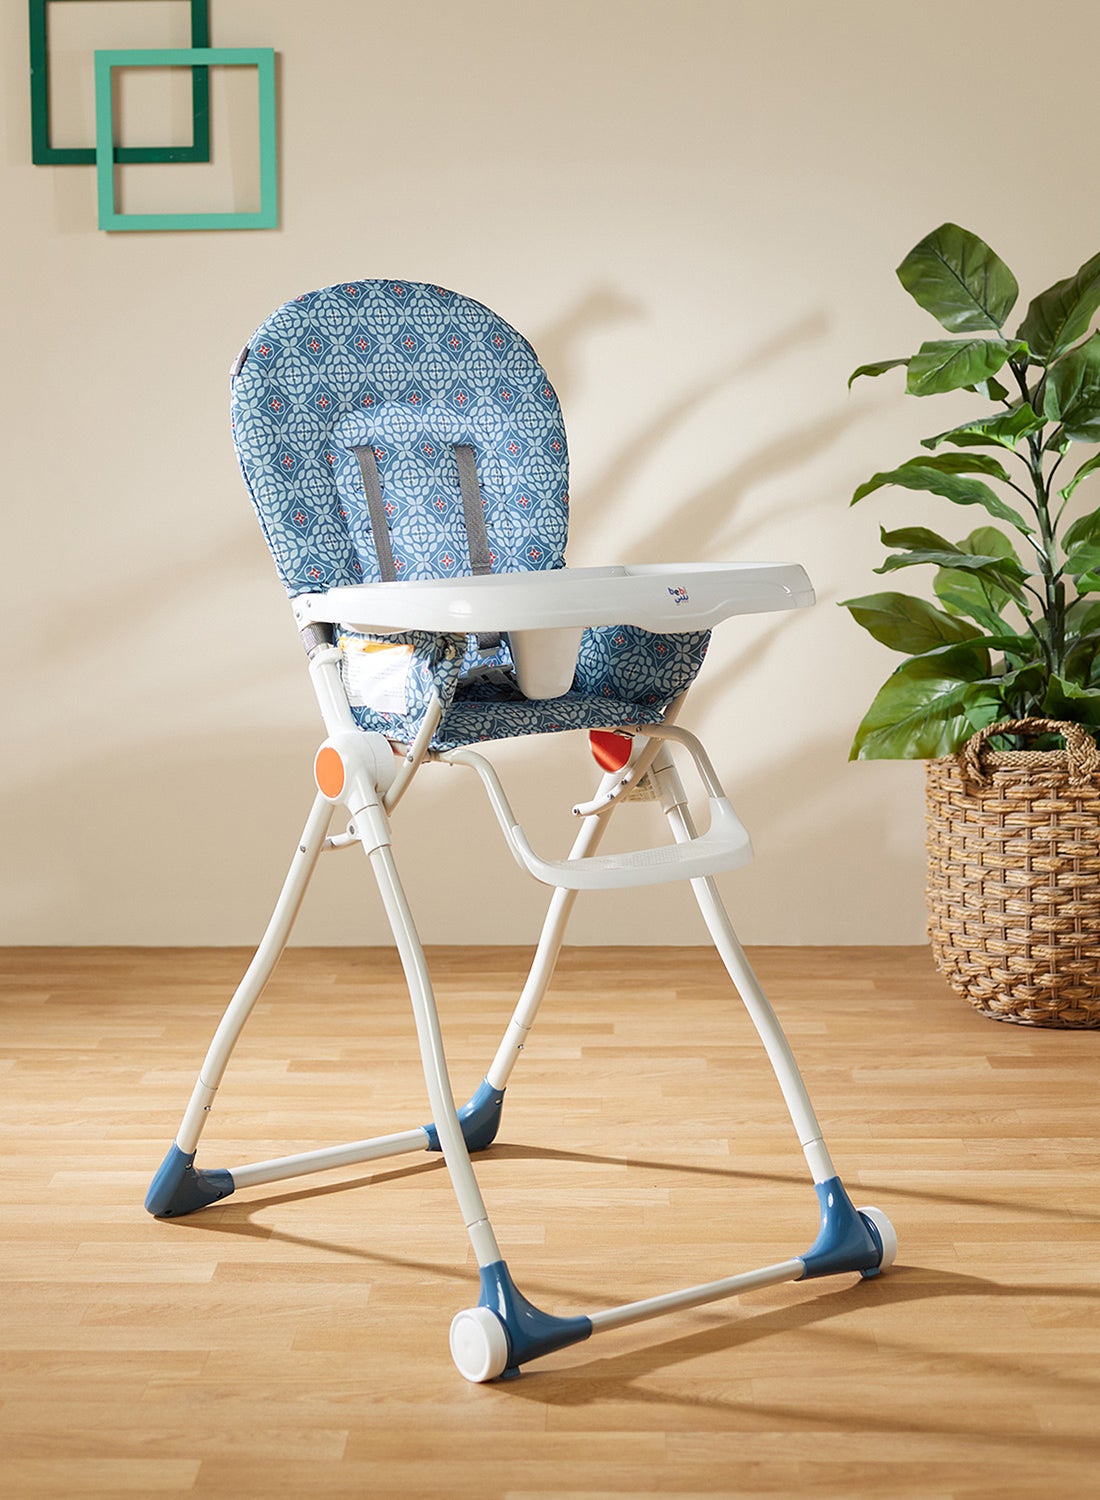 Foldable Baby Feeding High Chair Lightweight And Foldable With Multiple Recline Modes Suitable For Babies For 6 Months To 3 Years Blue 